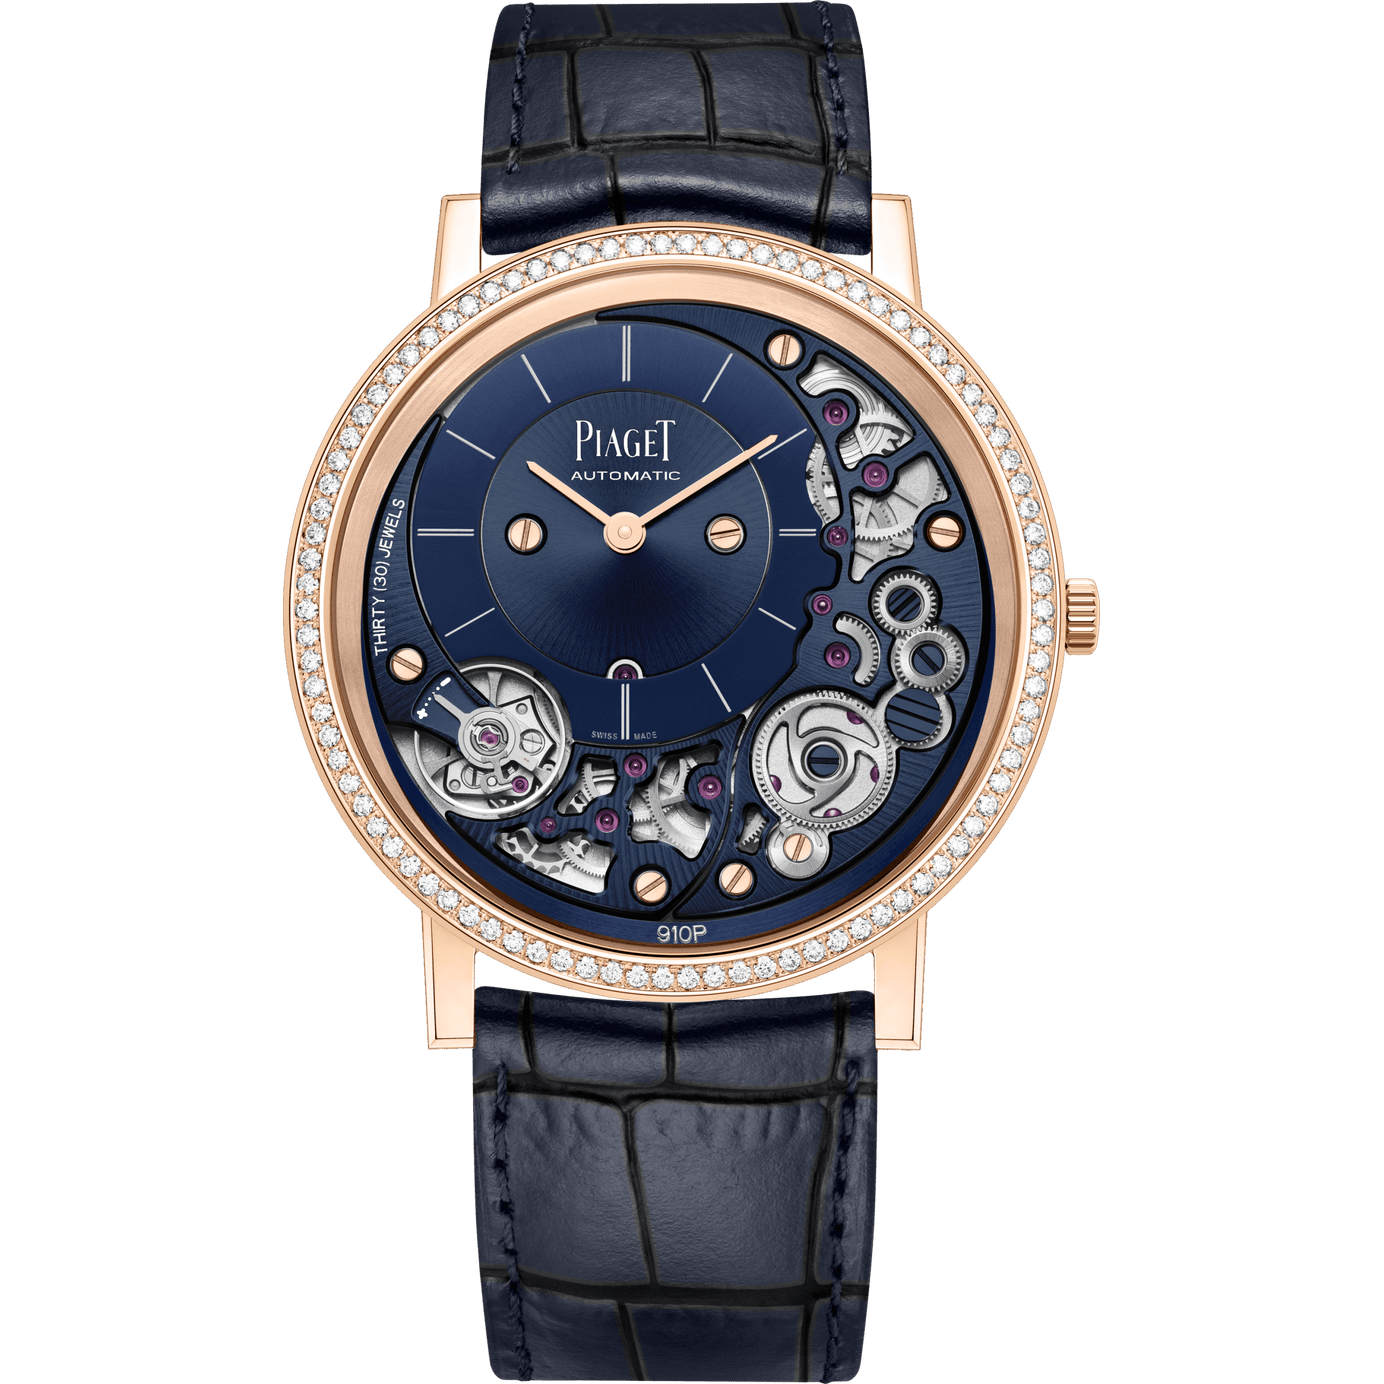 Piaget Dancer for Rs.931,213 for sale from a Private Seller on Chrono24